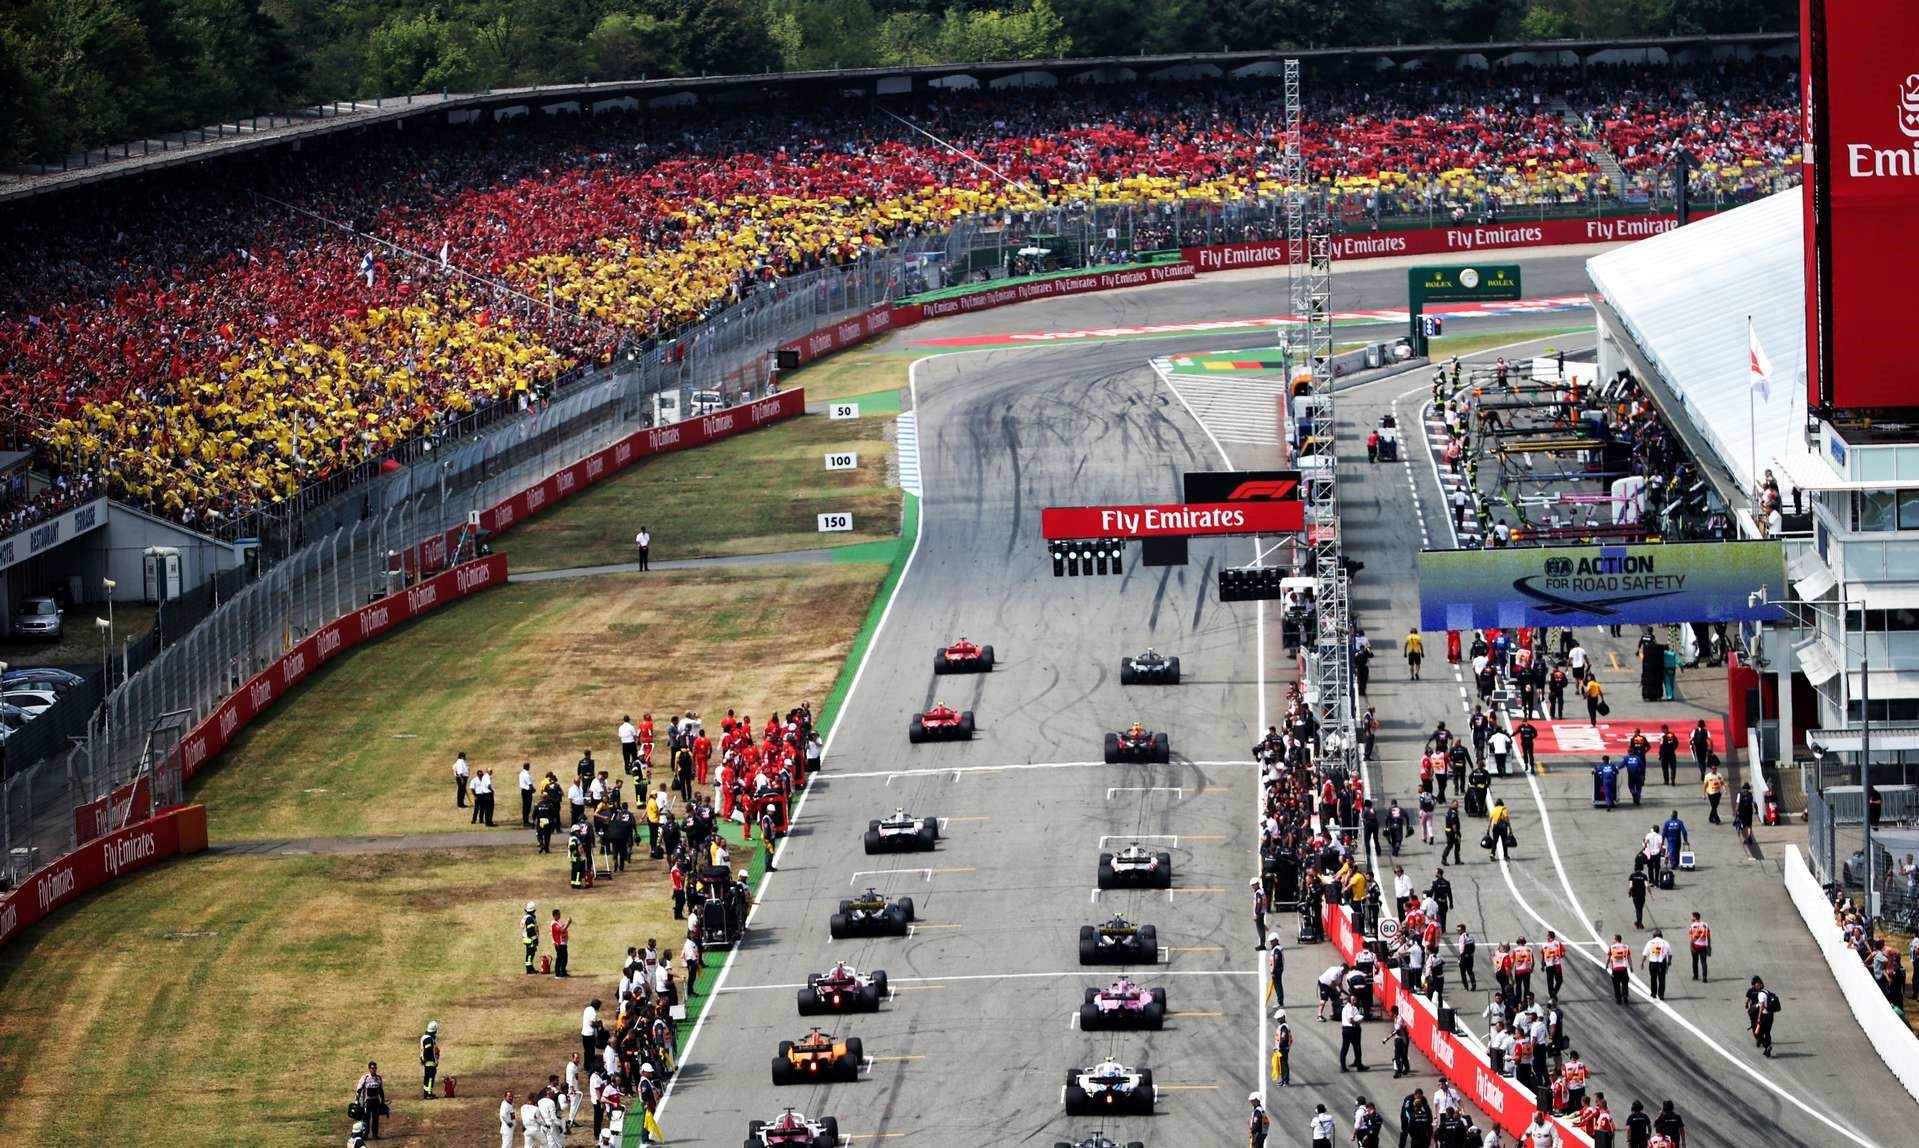 16-facts-about-hockenheimring-formula-1-race